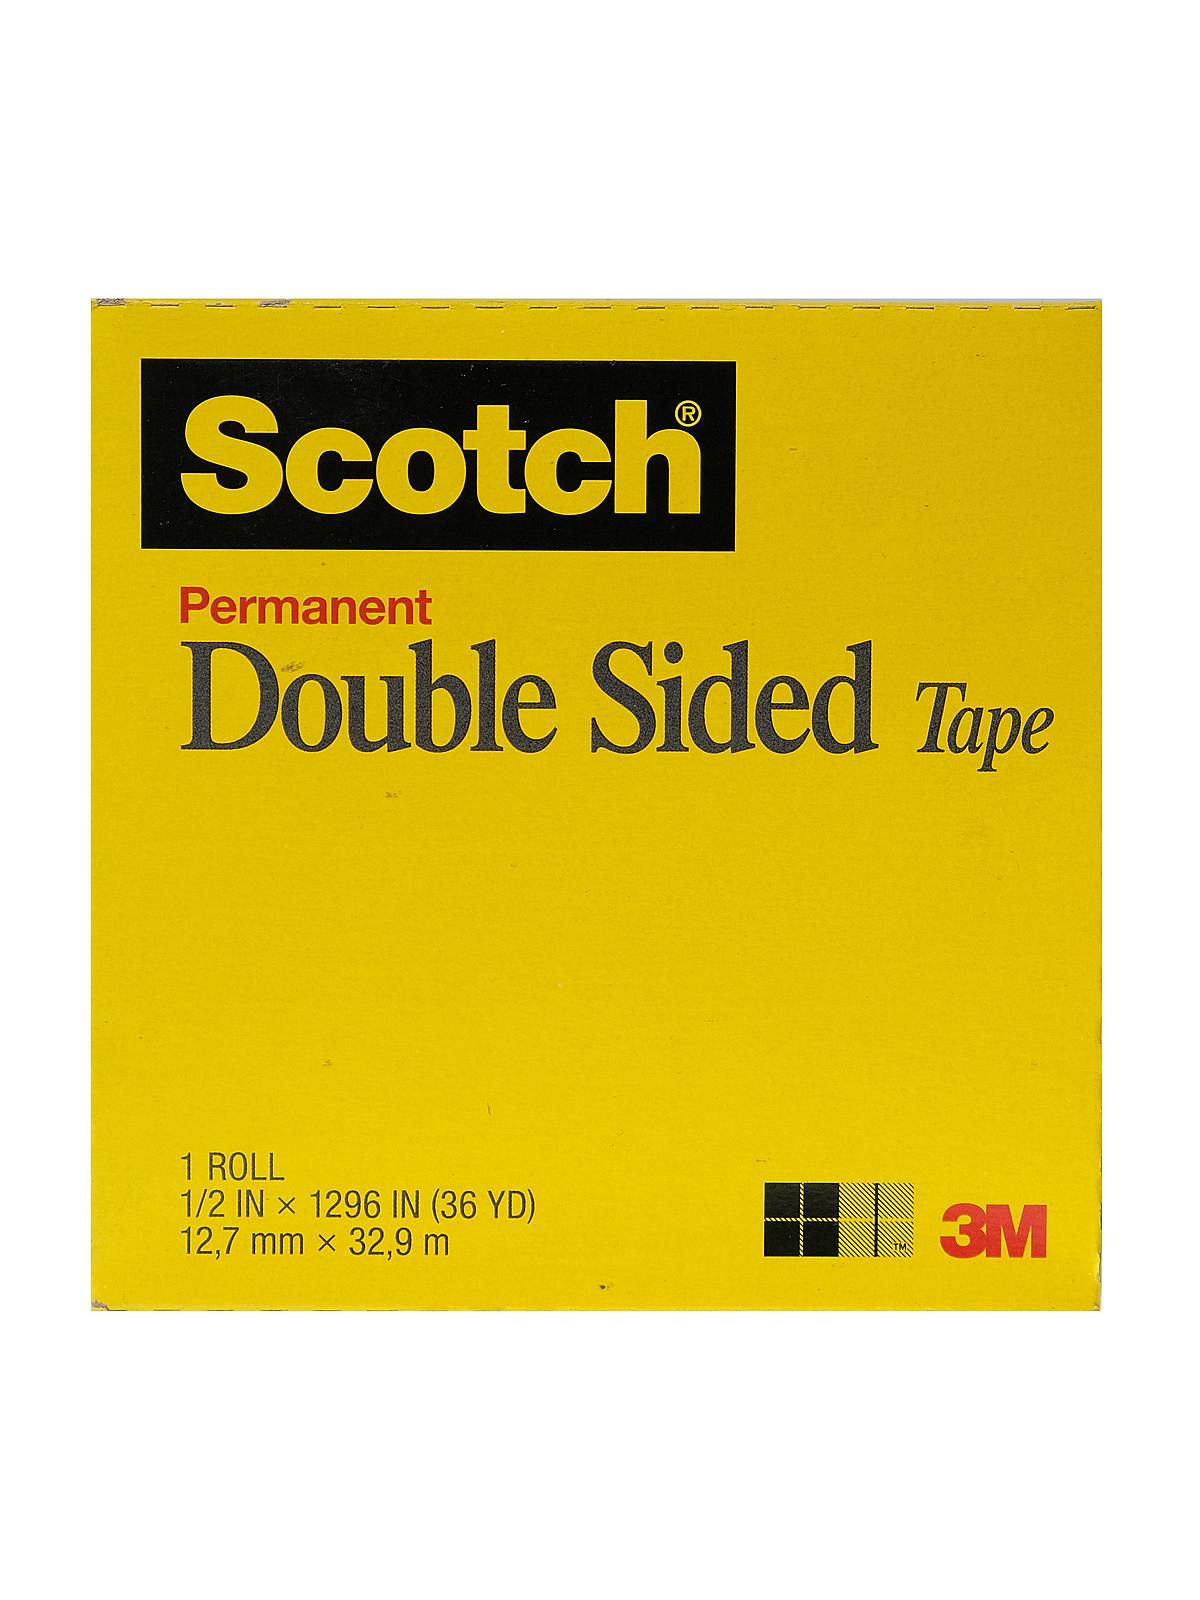 Permanent Double Sided Tape 1 2 In. X 36 Yd. Roll With 3 In. Core 665